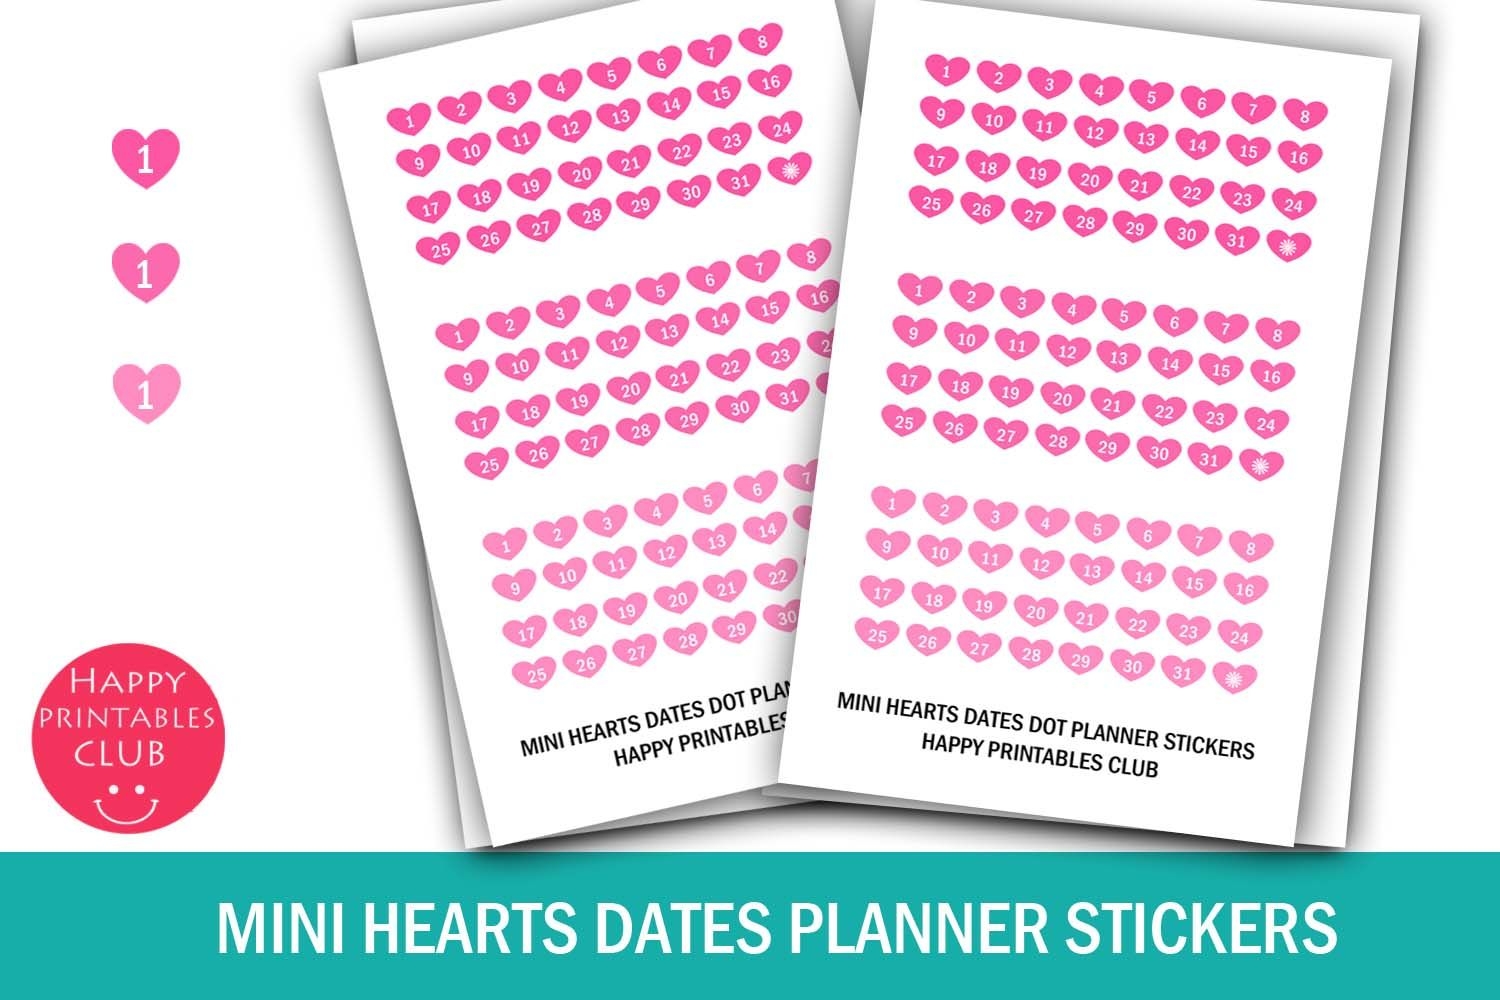 Mini Hearts Date Stickers-Calendar Numbers 1-31- Planners